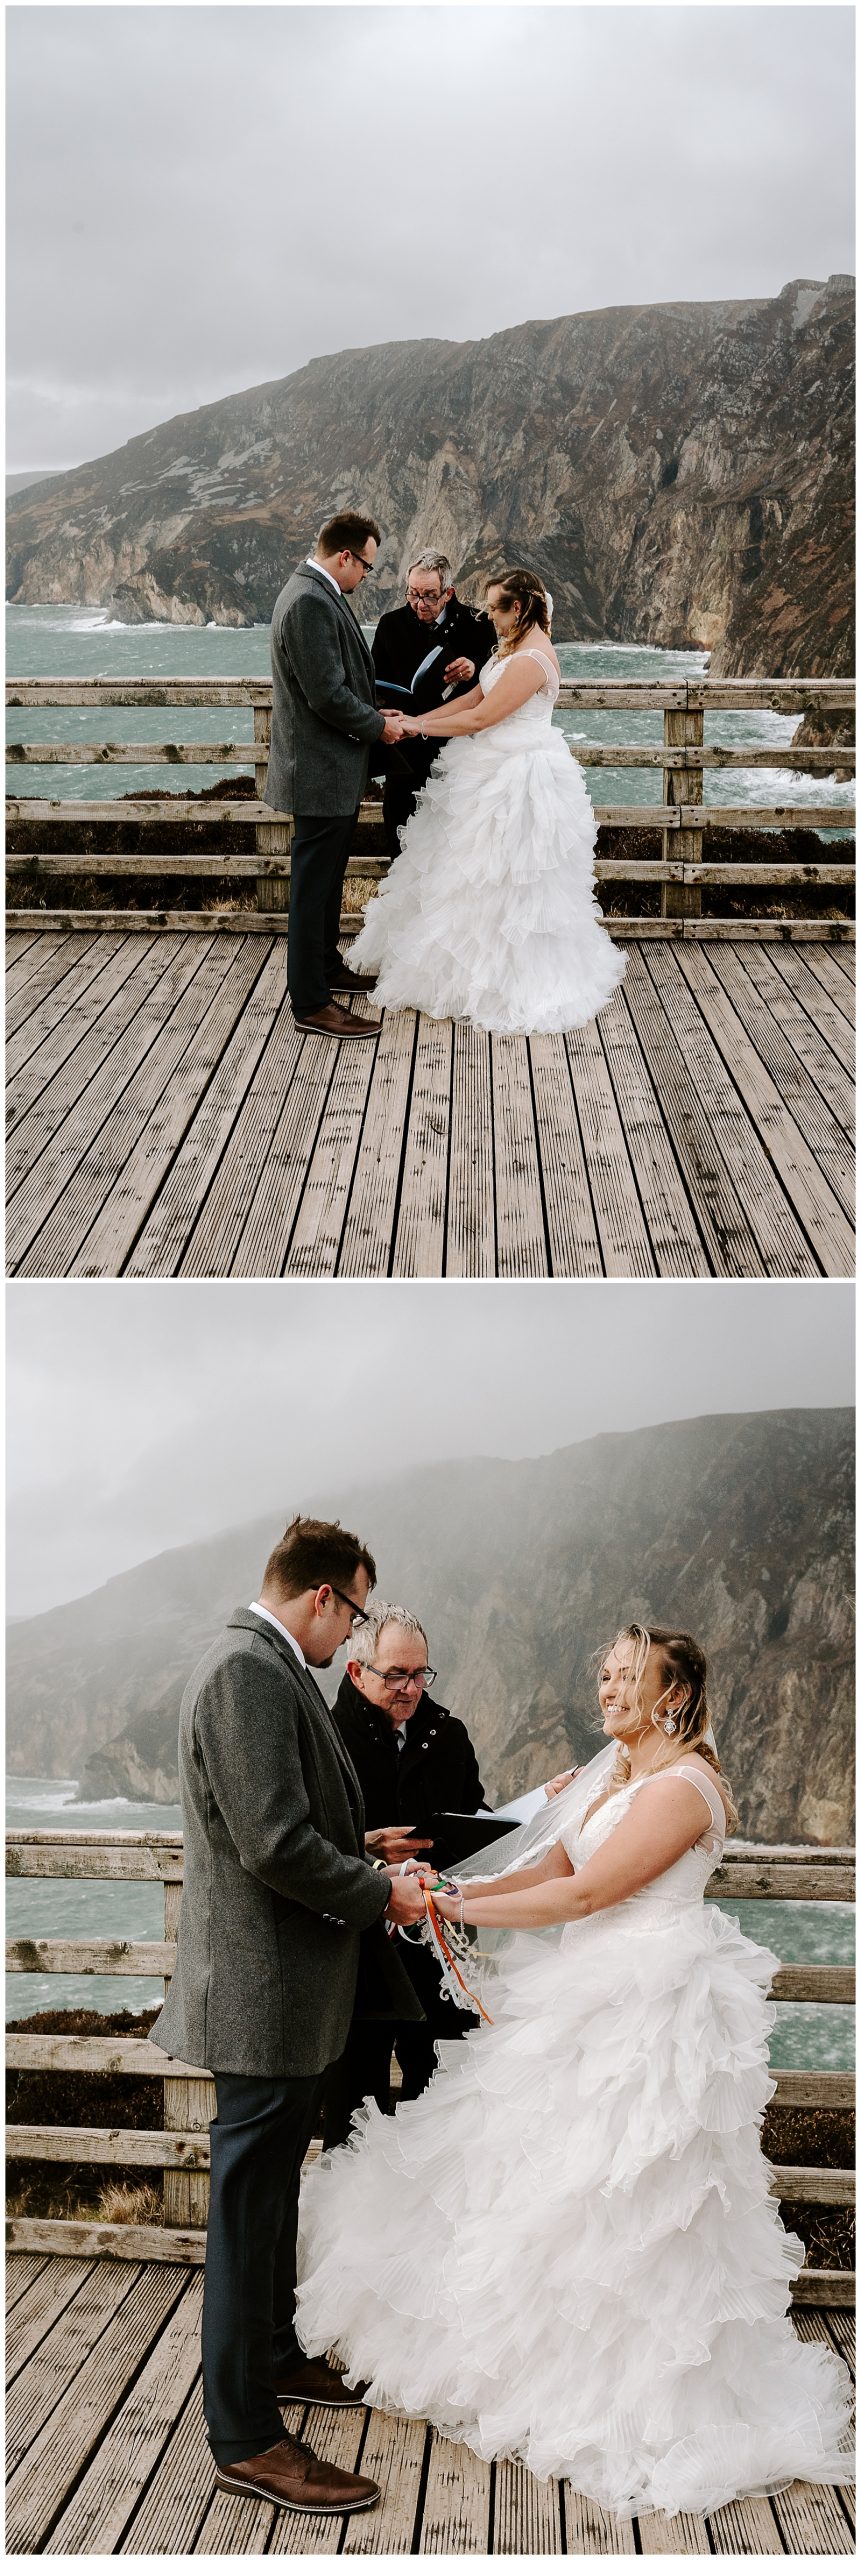 couple shares their vows during their ceremony in Ireland.